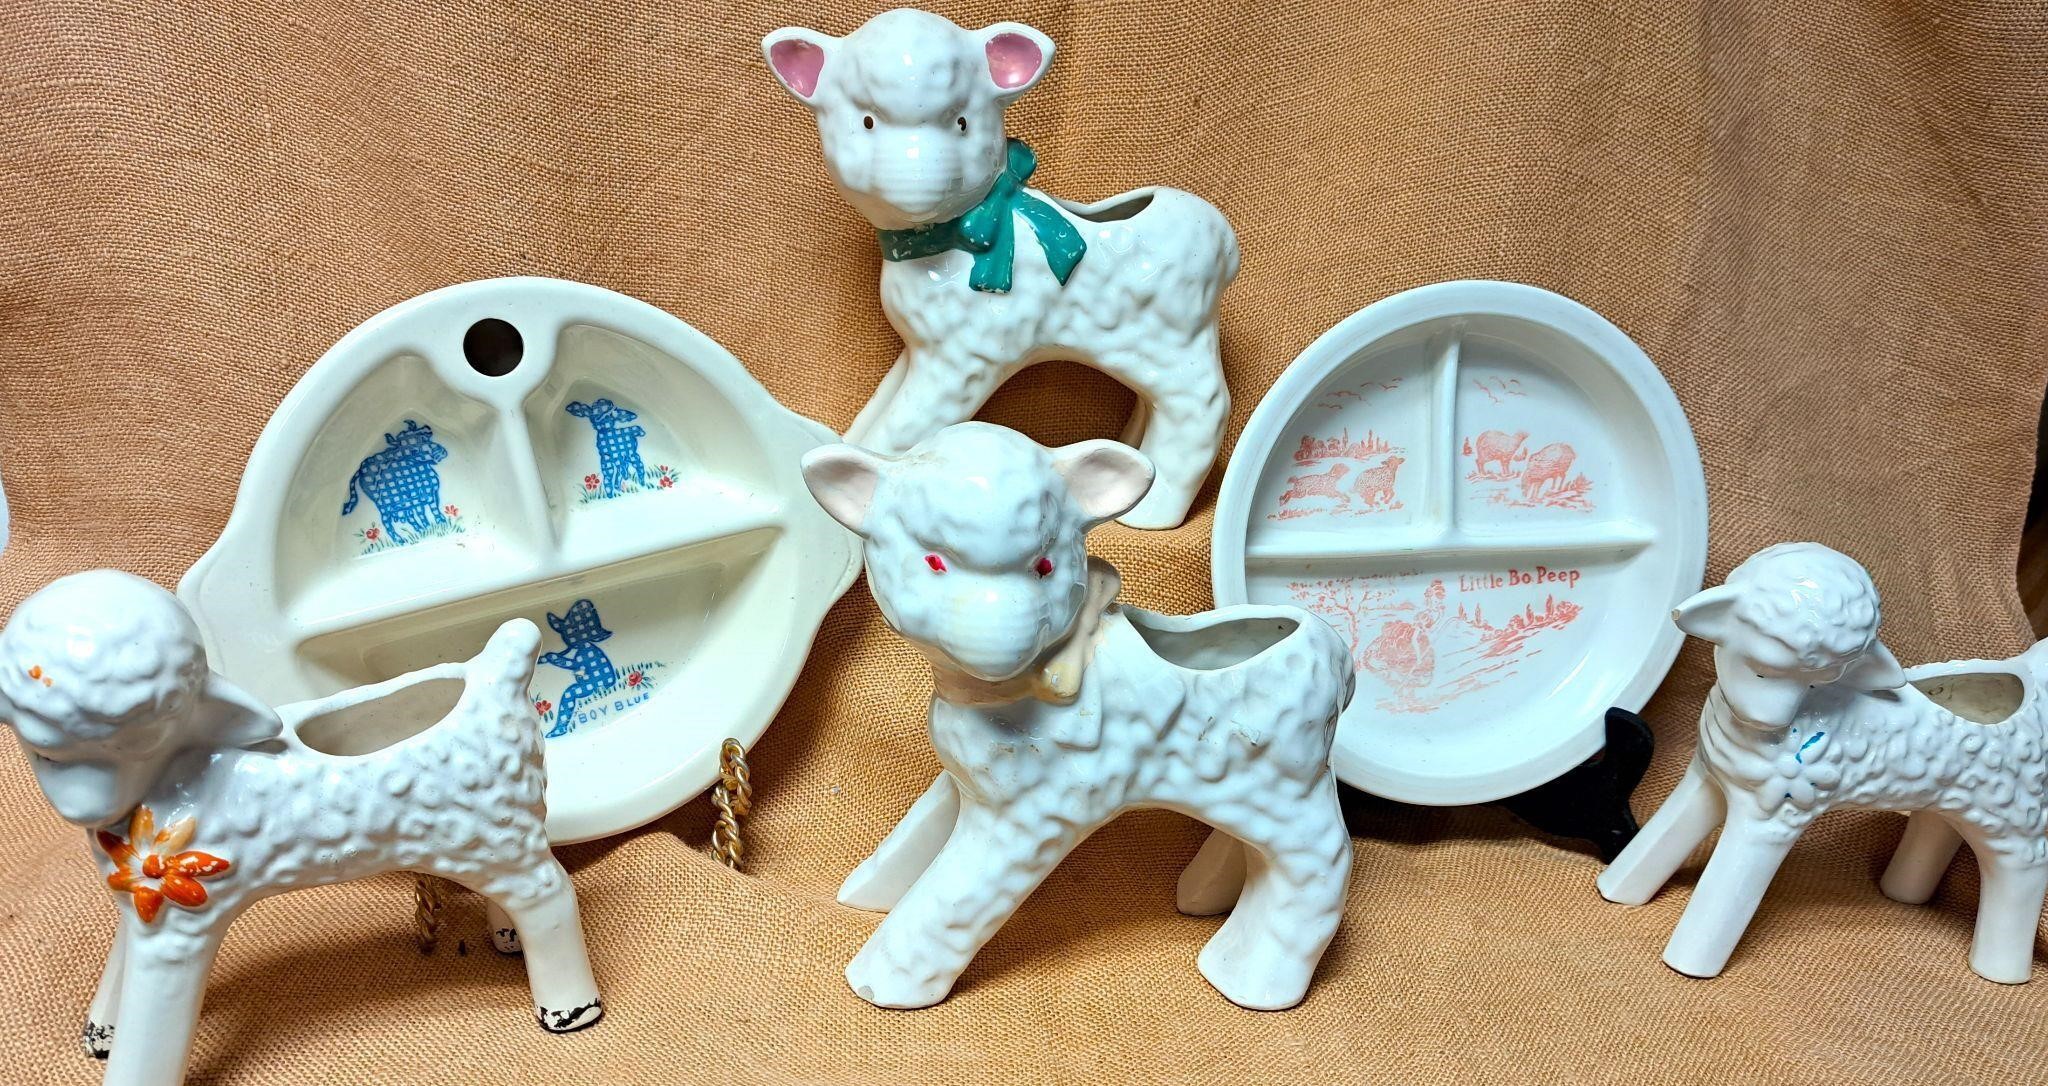 CHARMING LAMB PLANTERS & CHILDRENS DIVIDED PLATES